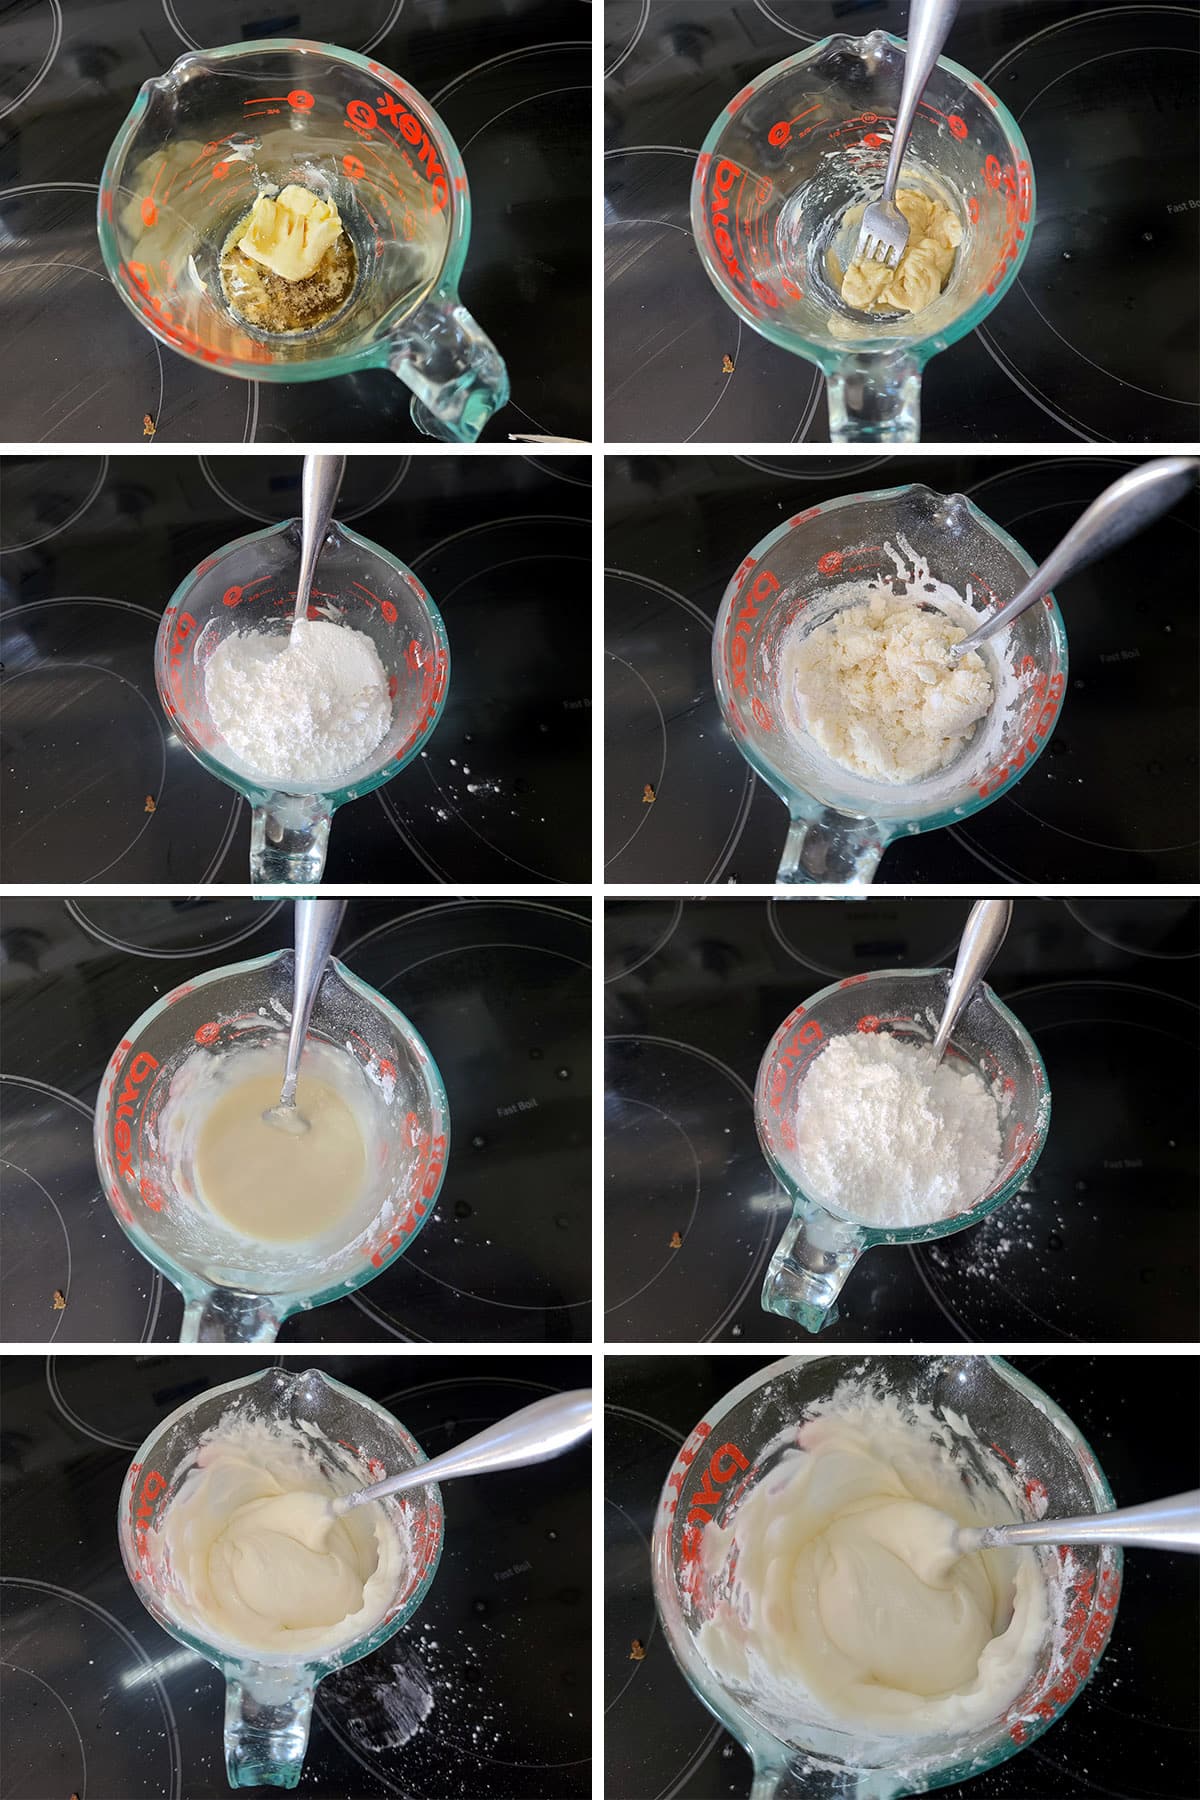 An 8 part image showing the frosting being made in a glass 2 cup measuring cup.